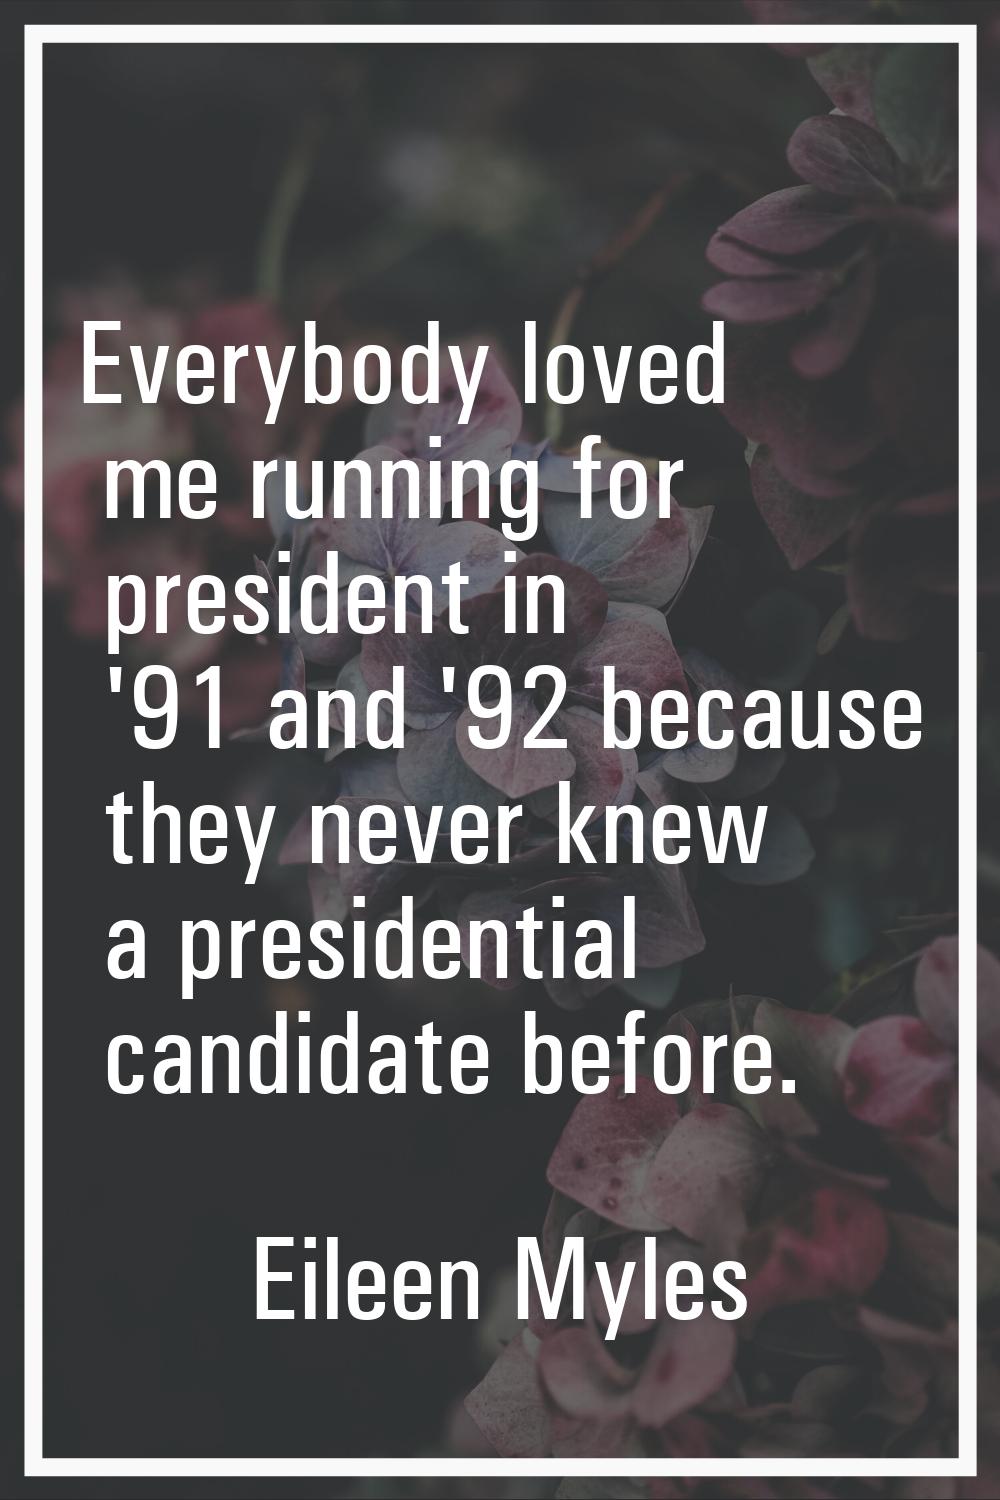 Everybody loved me running for president in '91 and '92 because they never knew a presidential cand